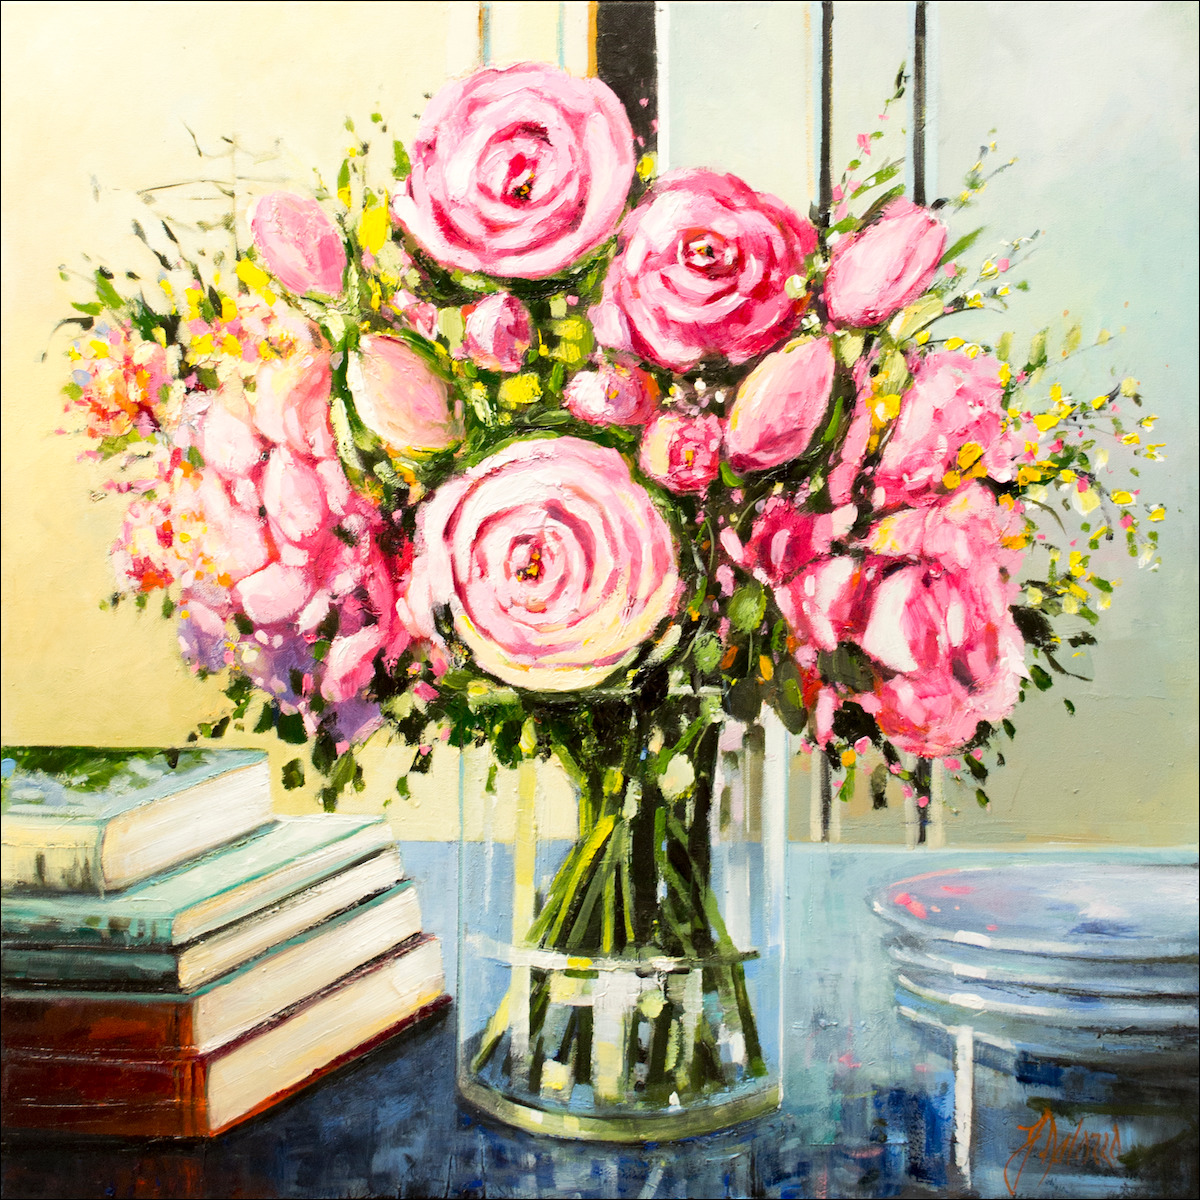 Floral Still Life "Embracing The Simple Things in Life" Original Artwork by Judith Dalozzo